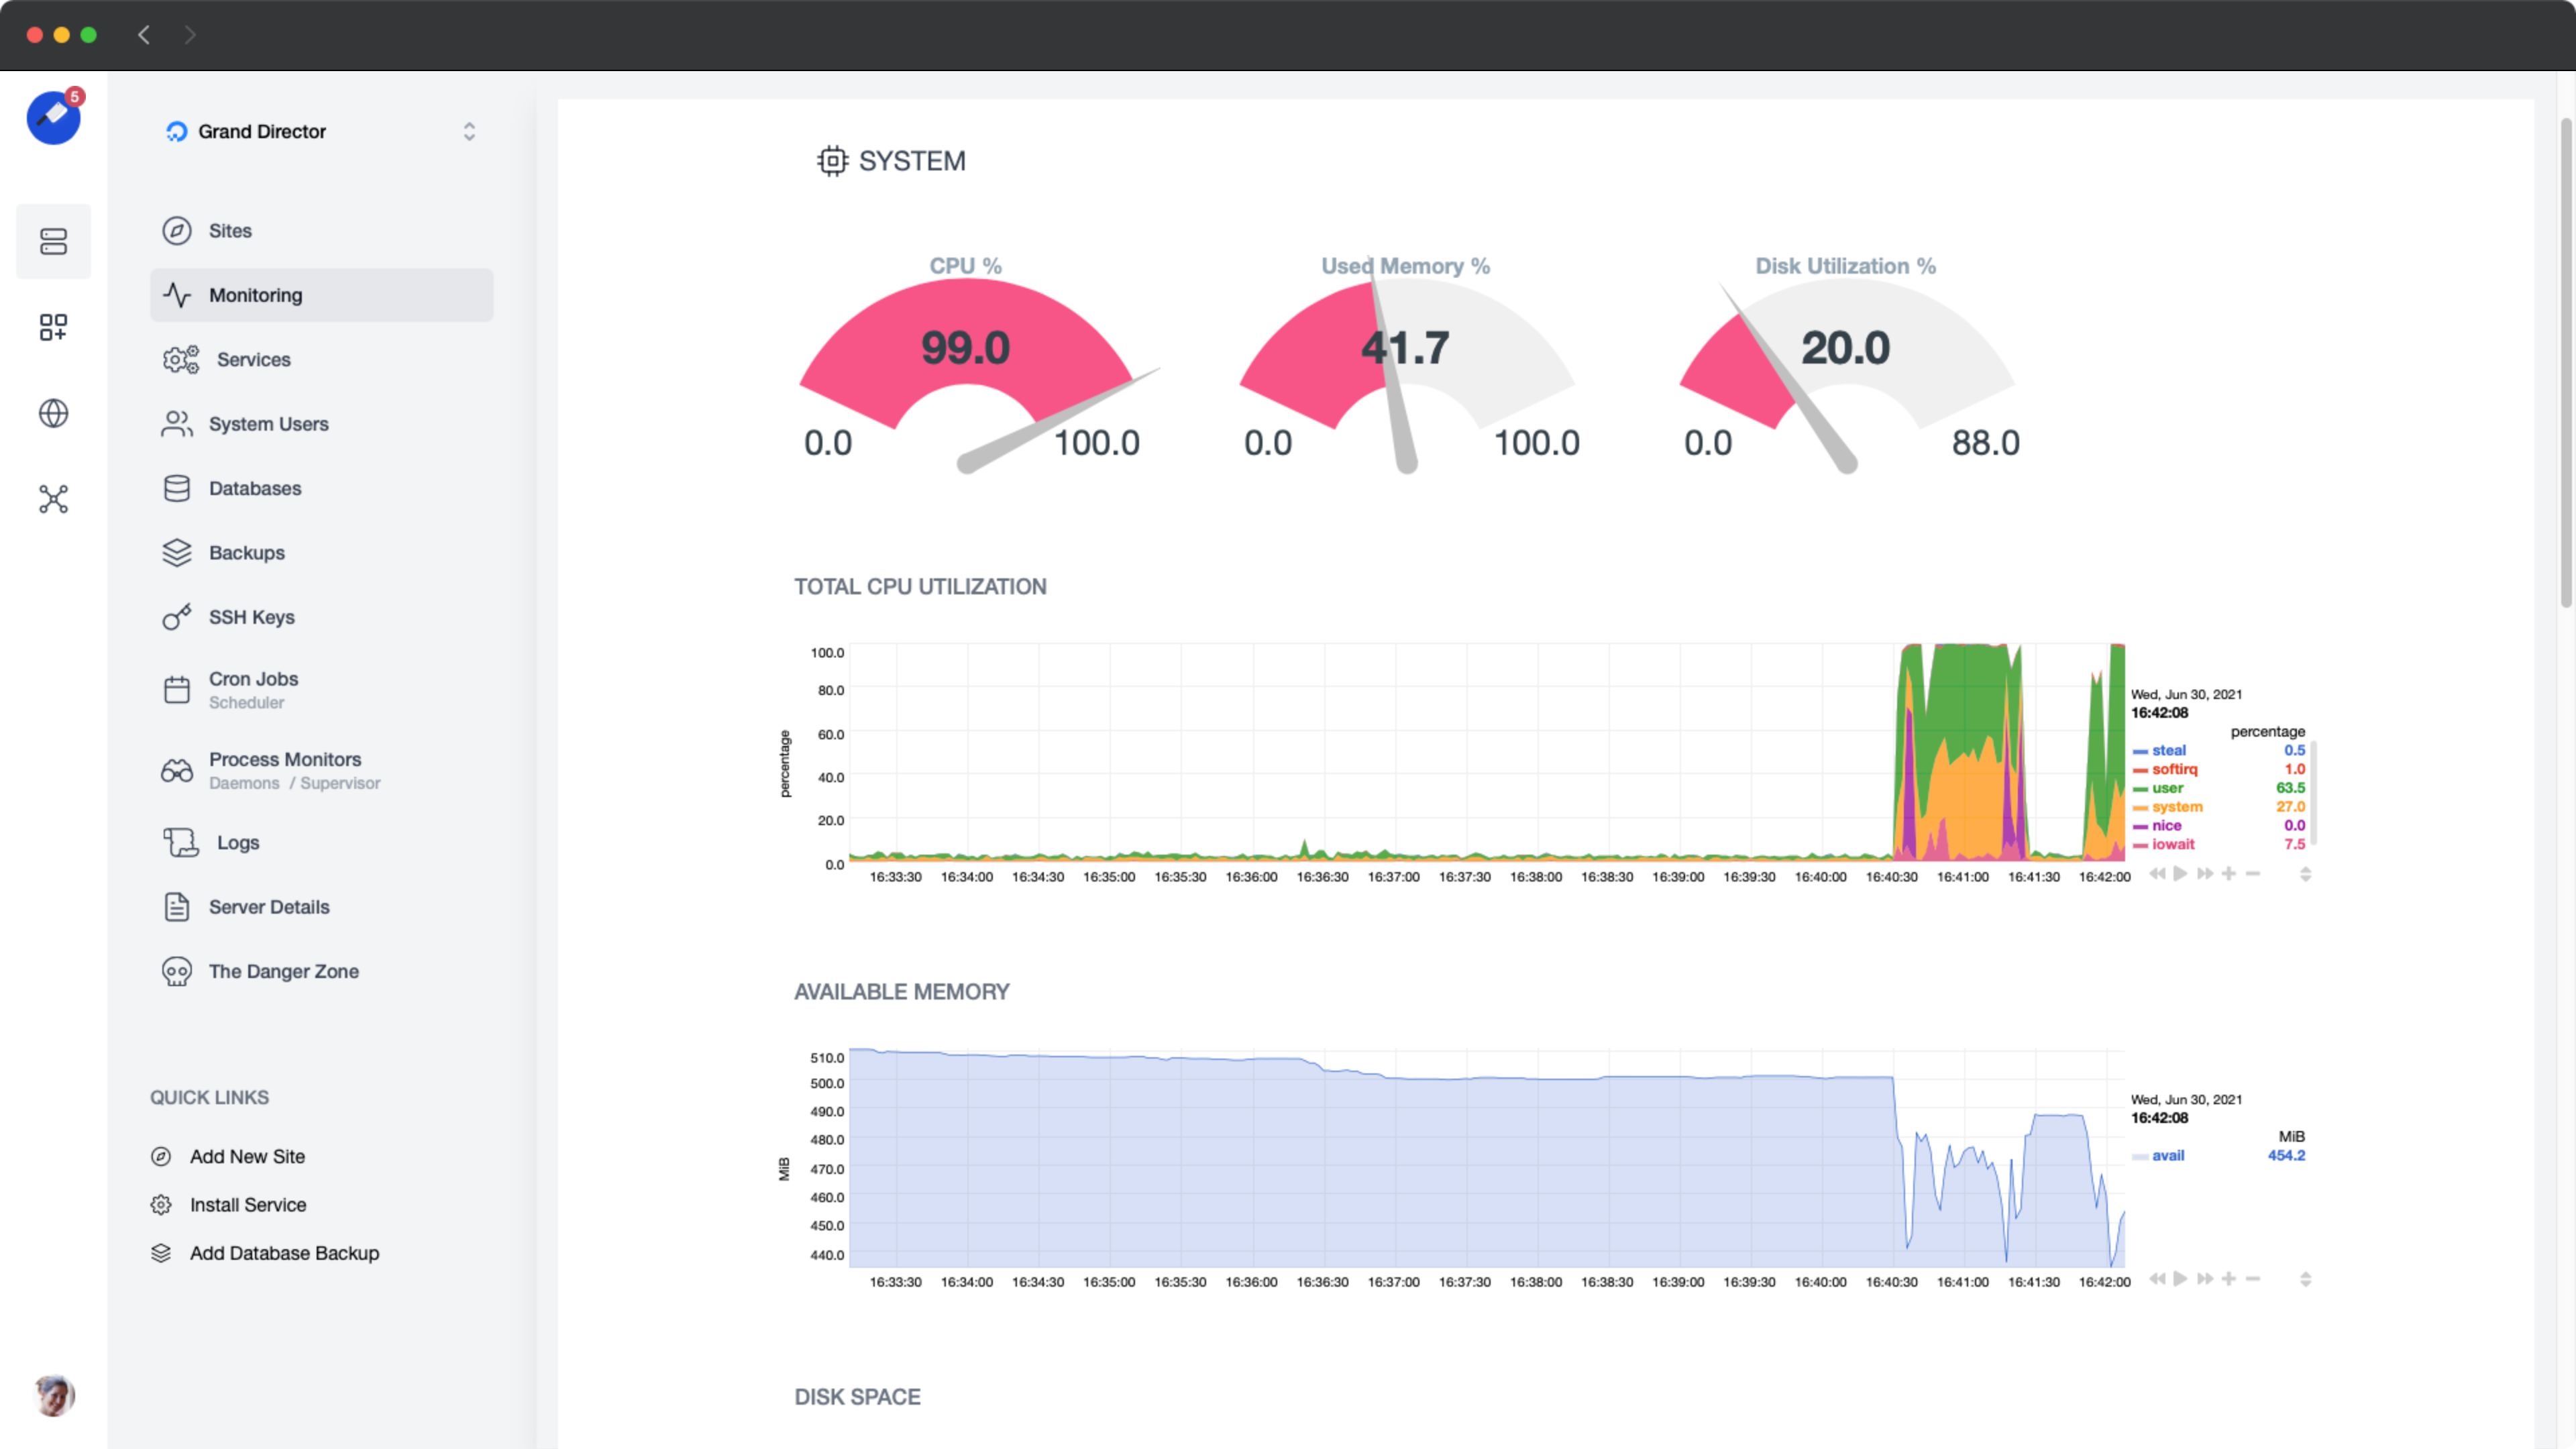 Enable server monitoring to keep track of your servers health.